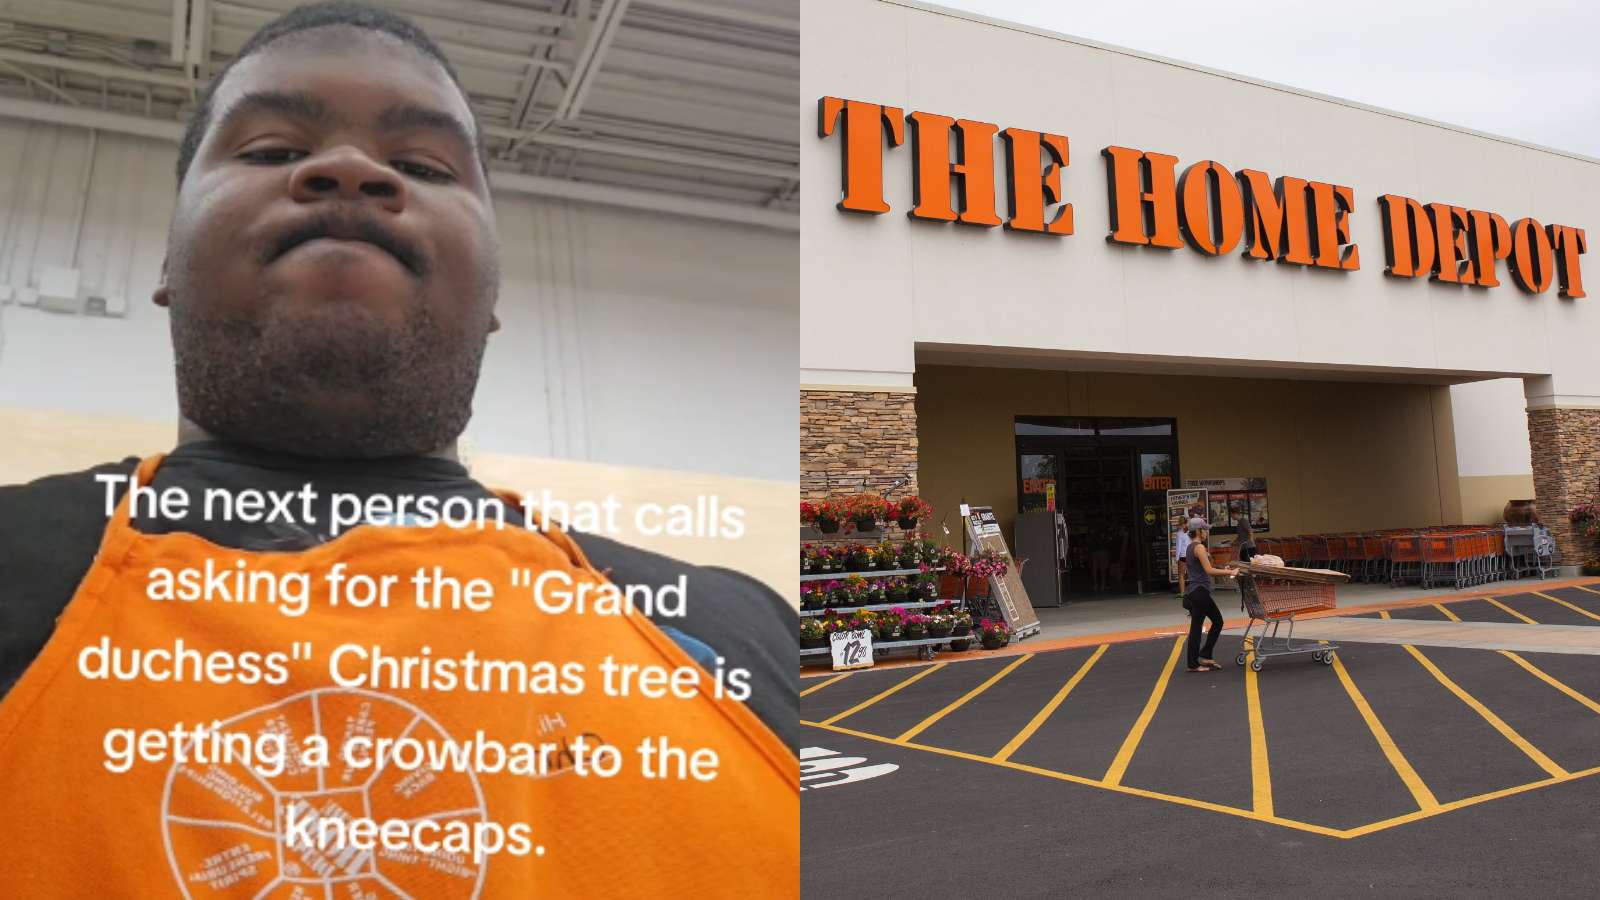 tiktoker arrested for threatening to use crowbar on customers at home depot